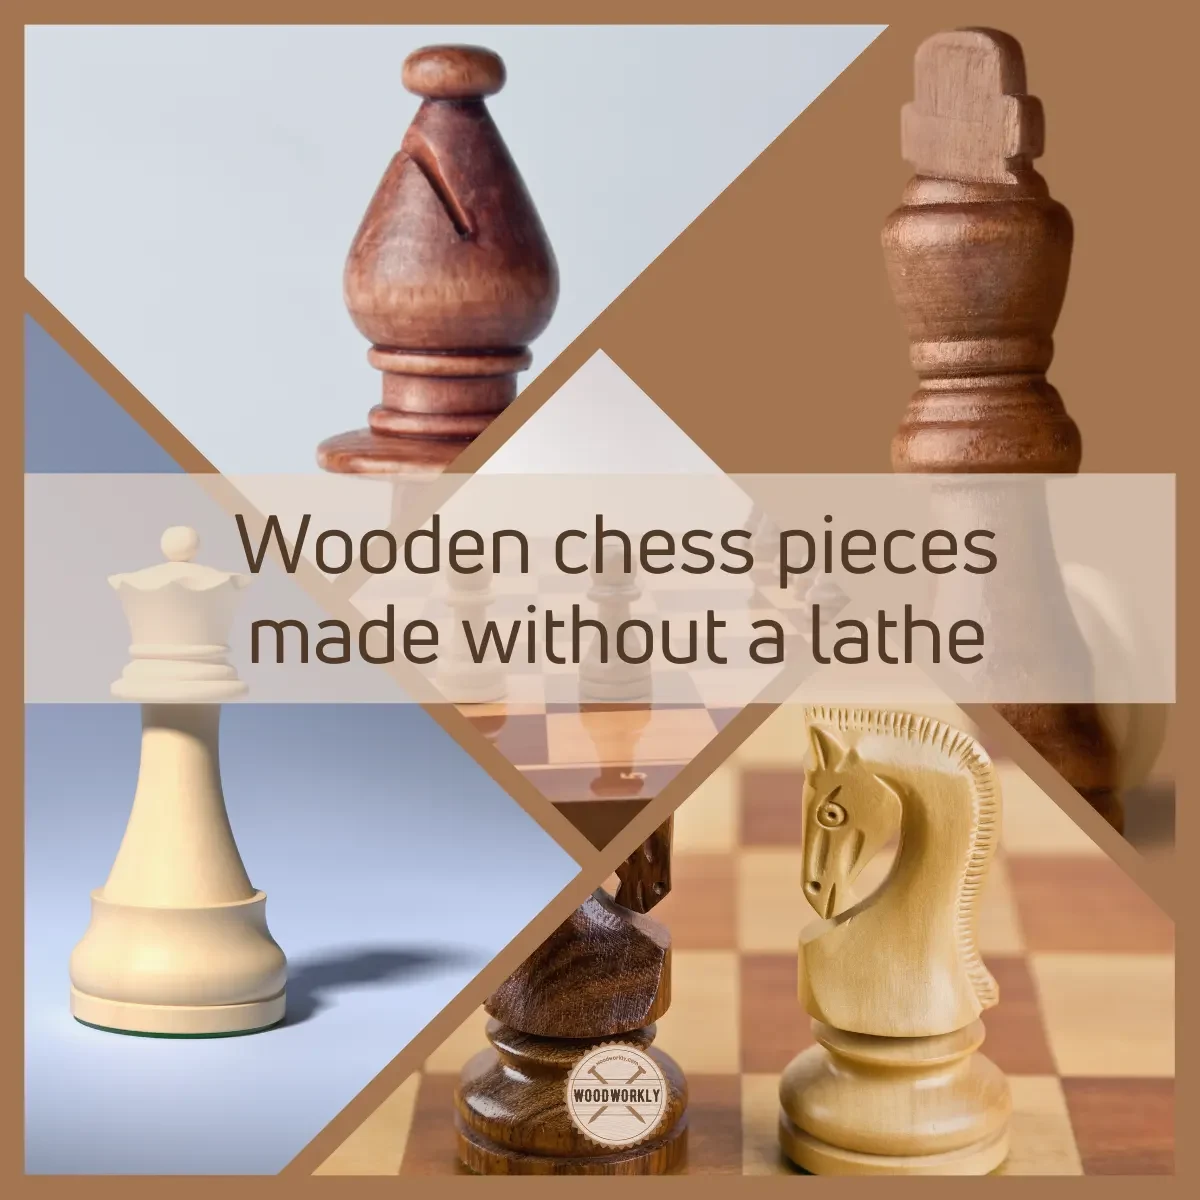 Wooden chess pieces made without a lathe